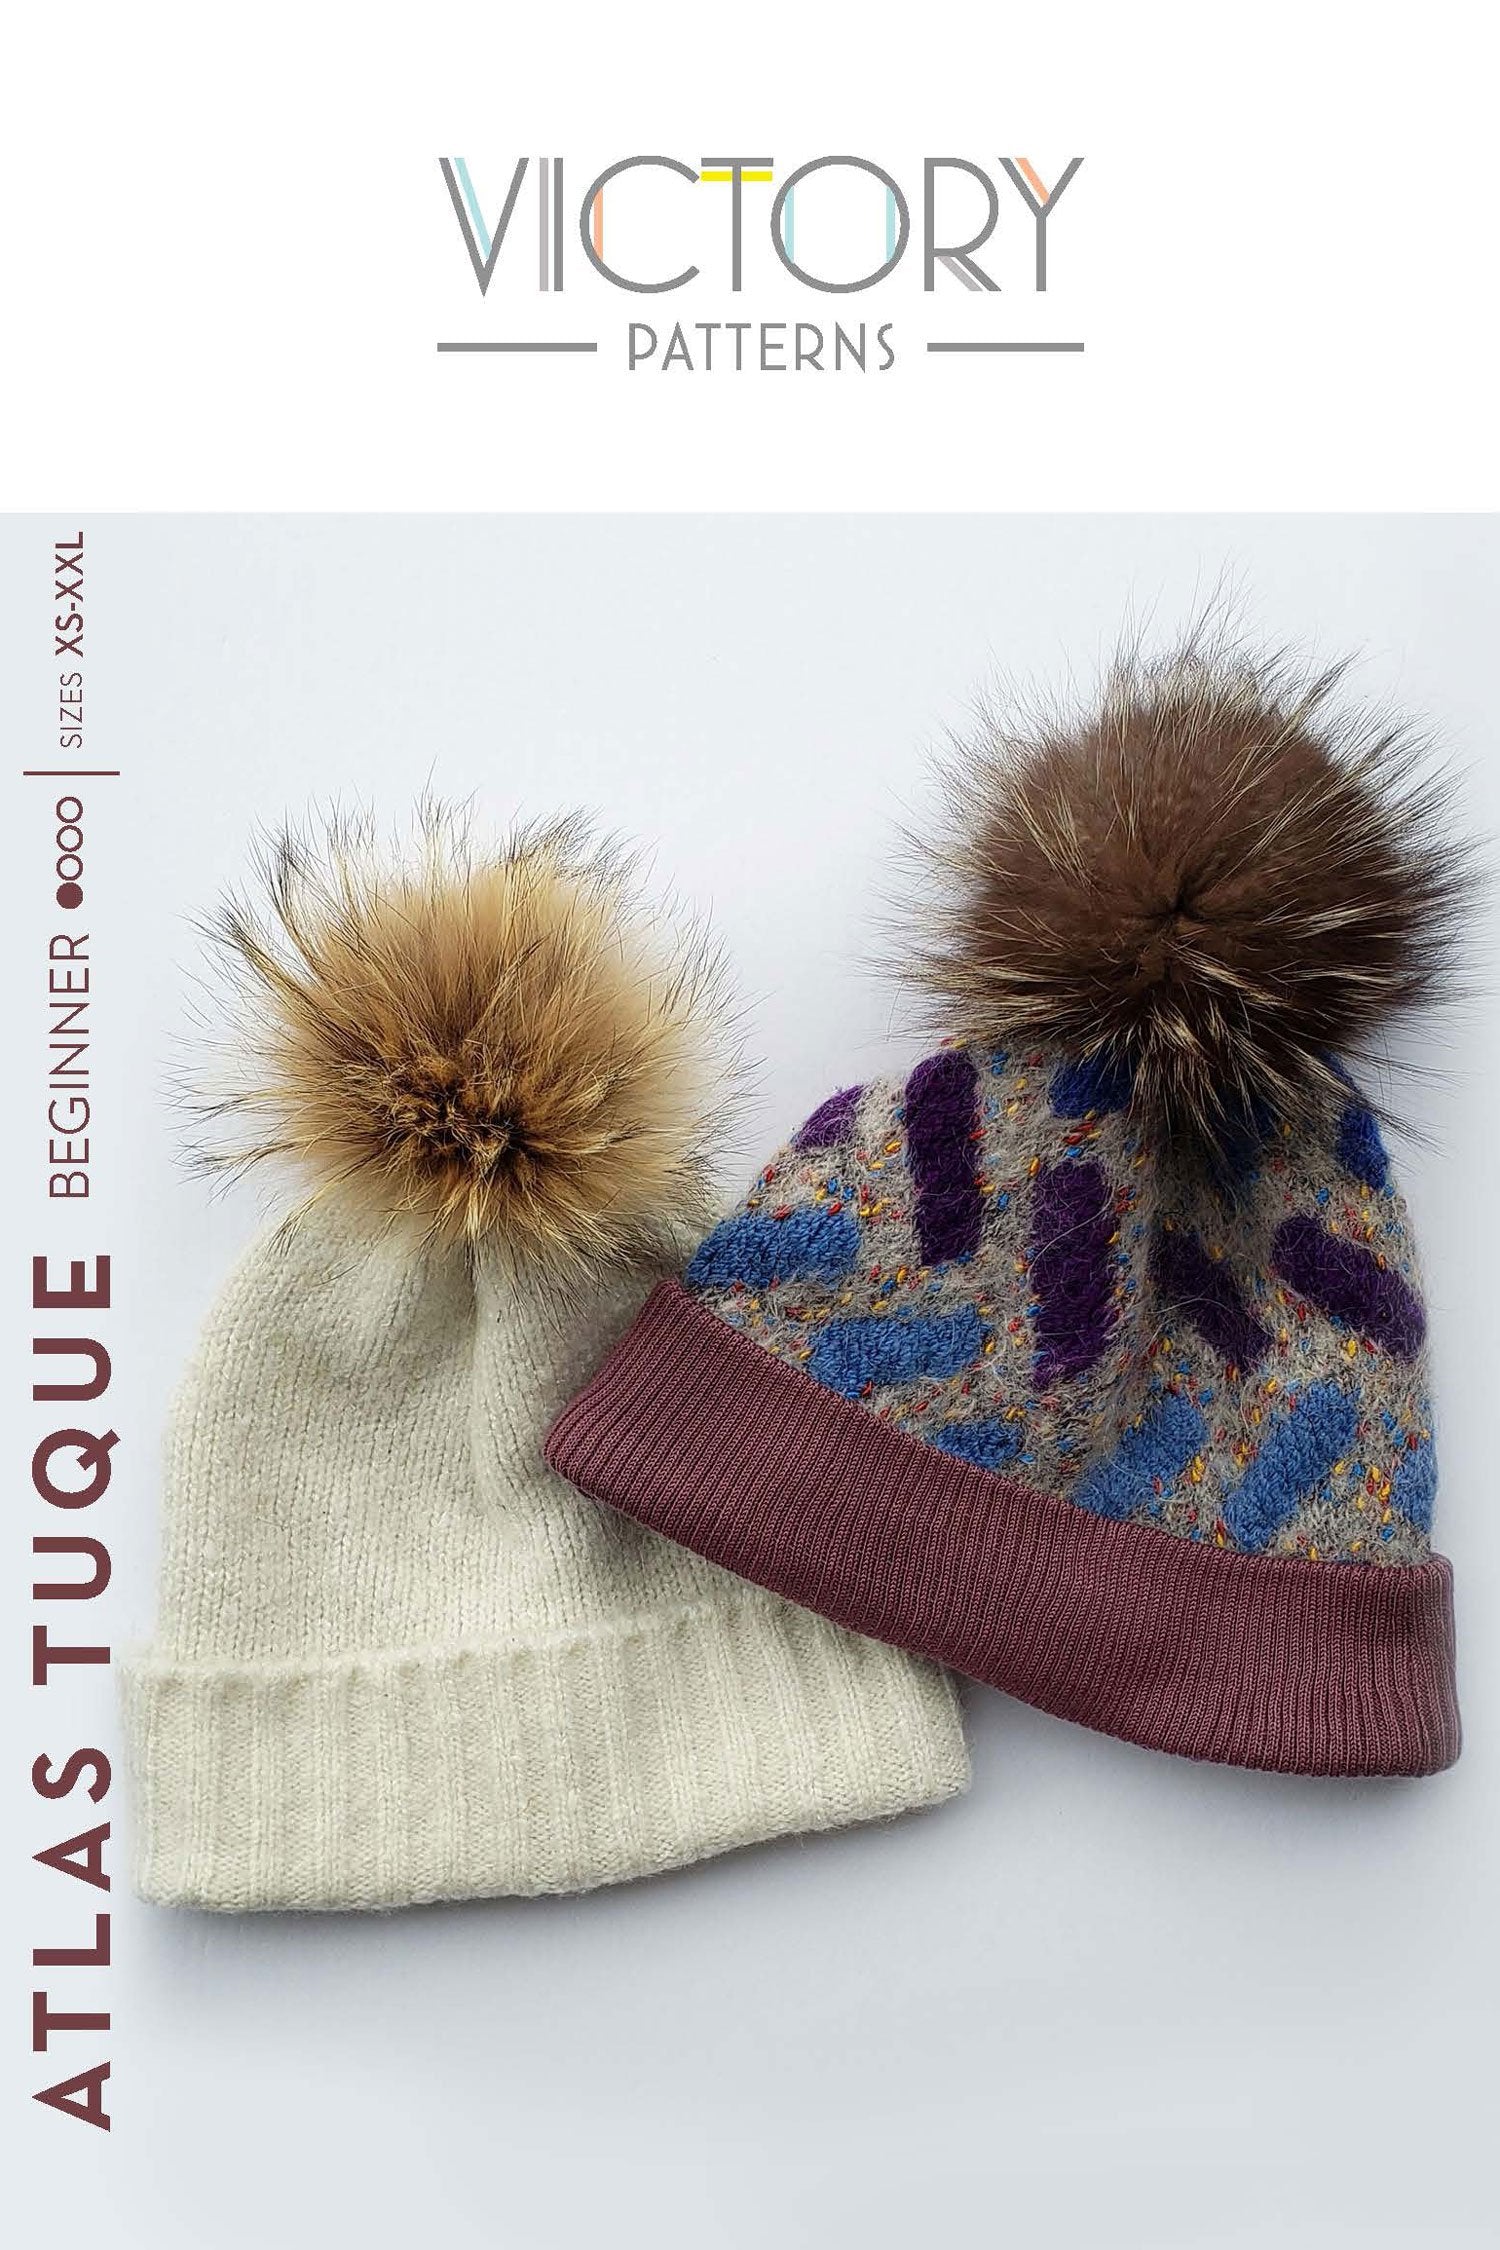 Victory Patterns Atlas Tuque Hat